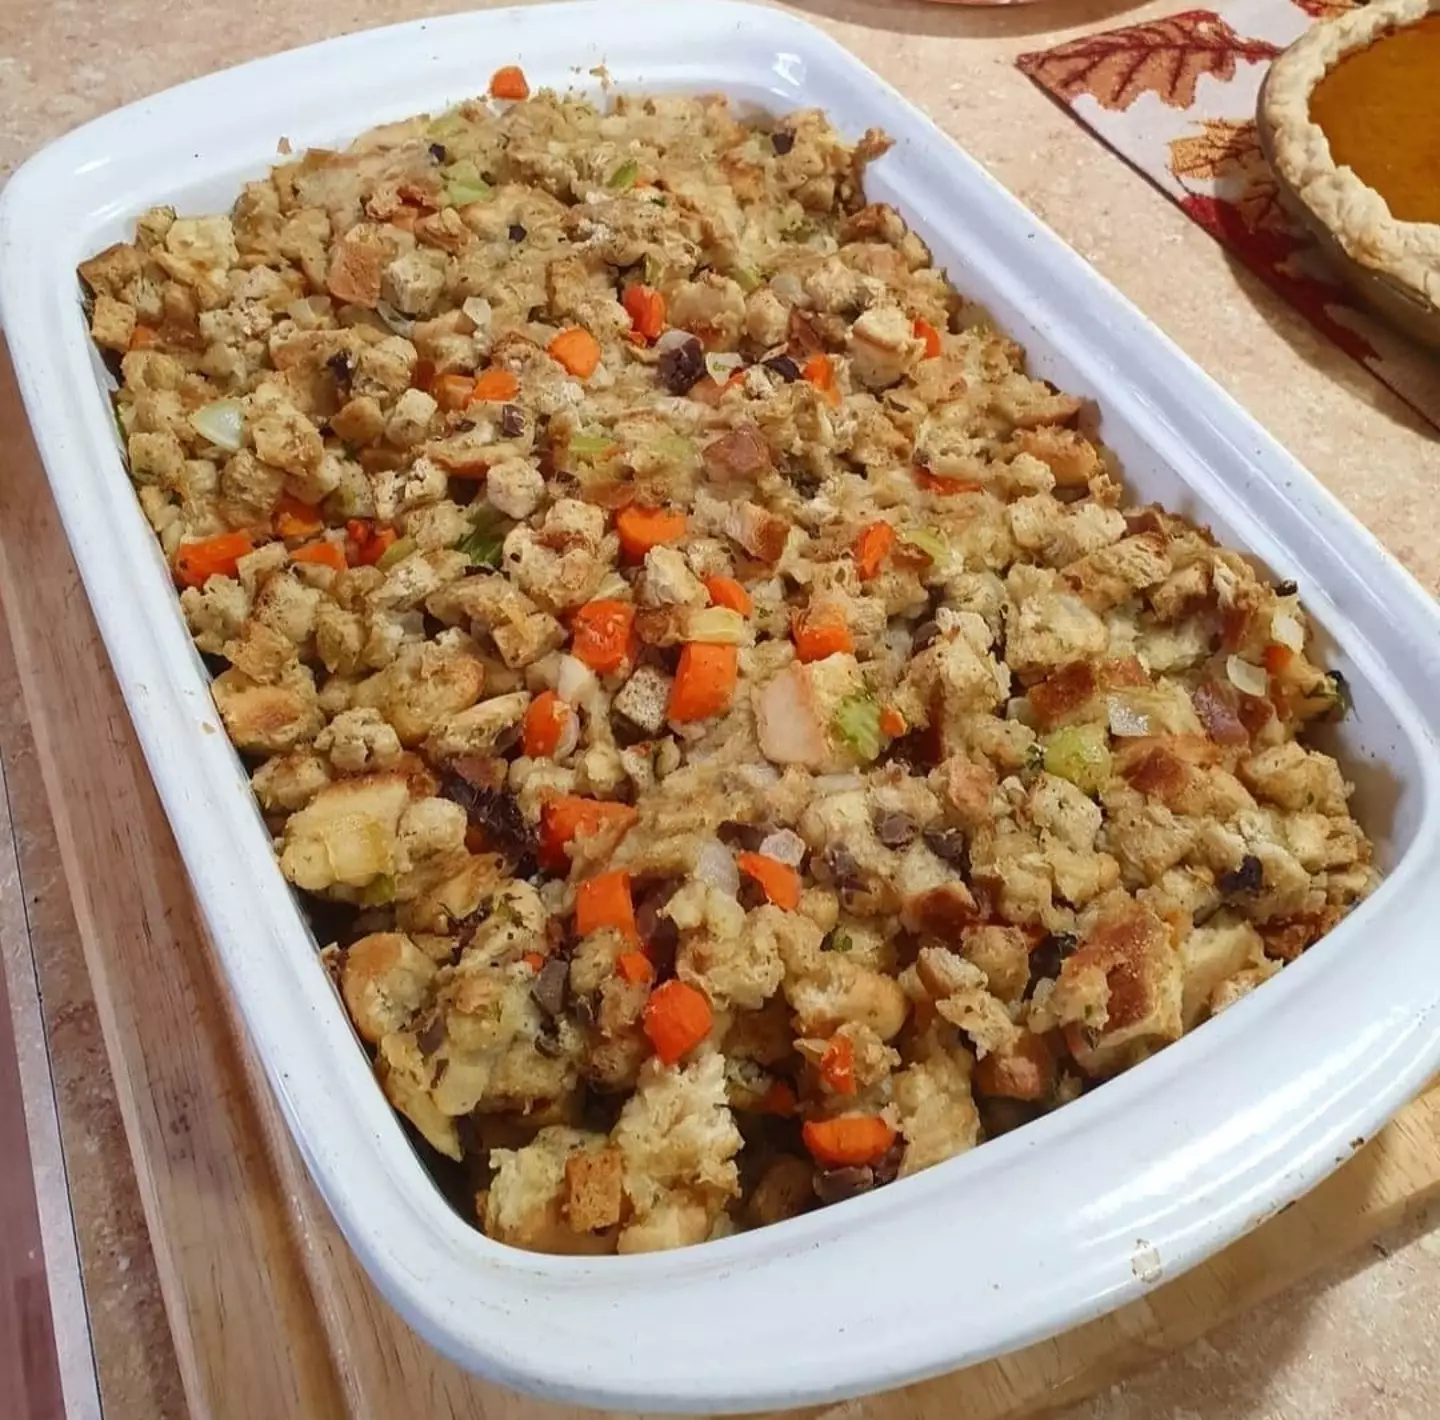 The stuffing doesn't come in balls like it does at home.